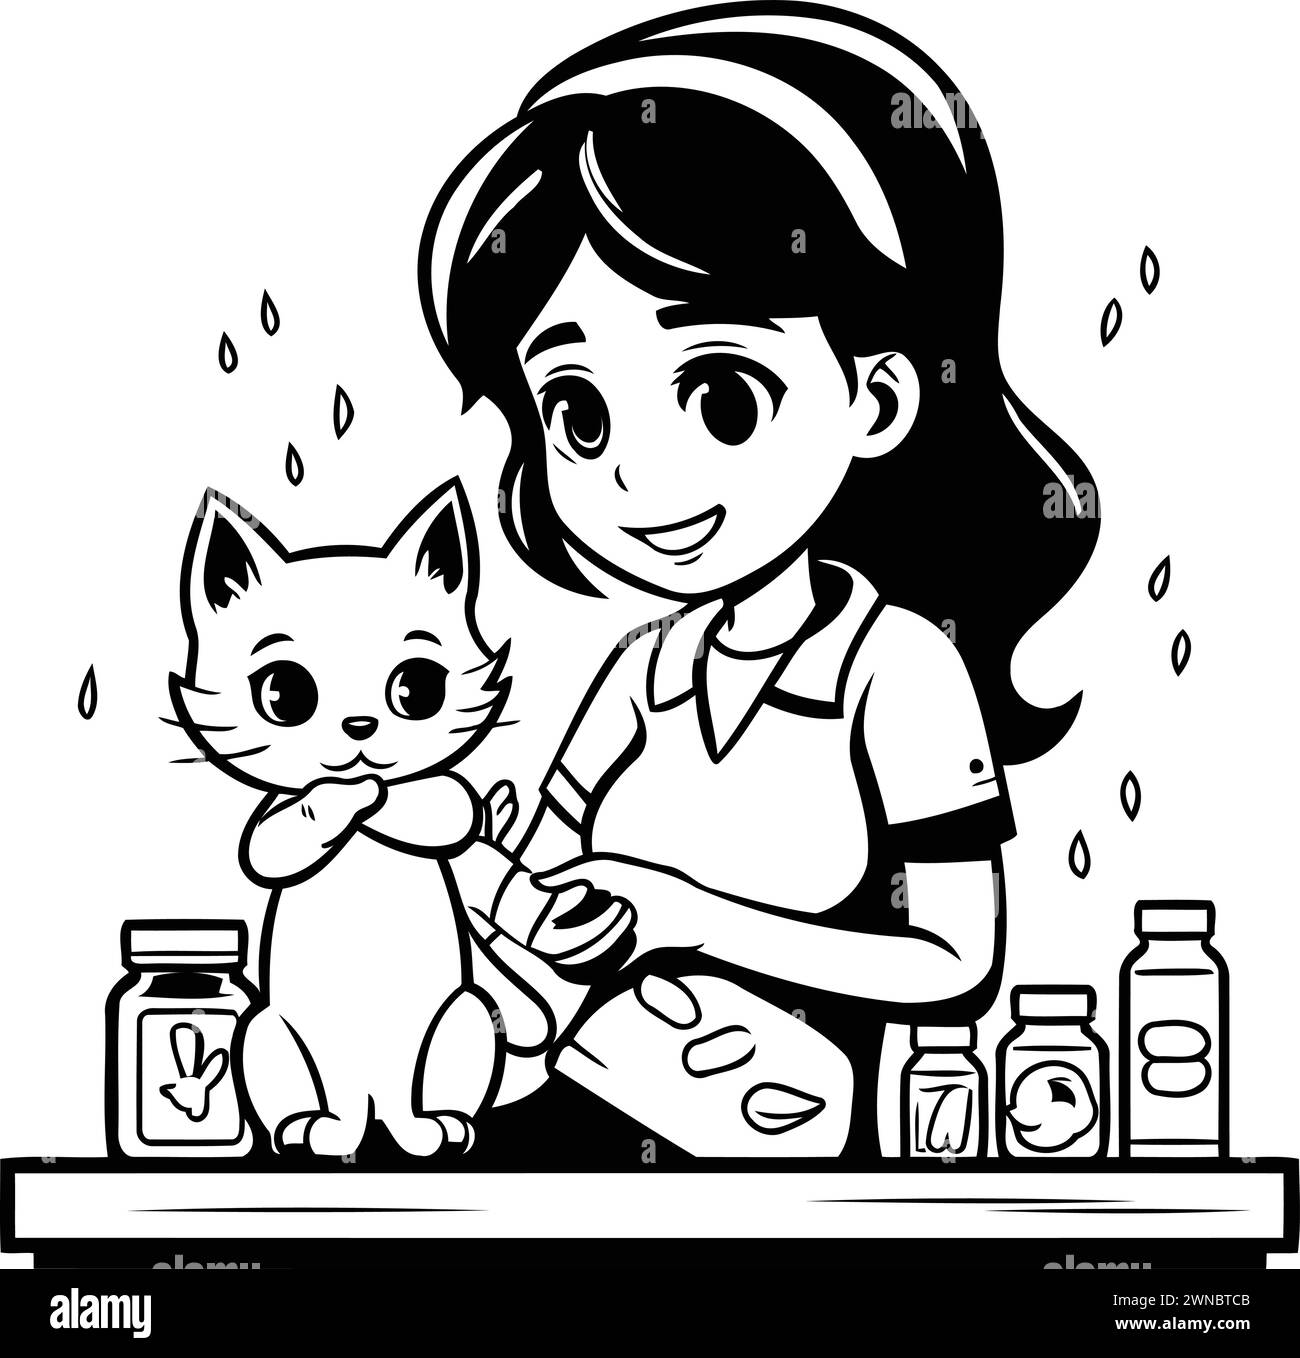 Girl washing cat in the kitchen. Black and white vector illustration. Stock Vector